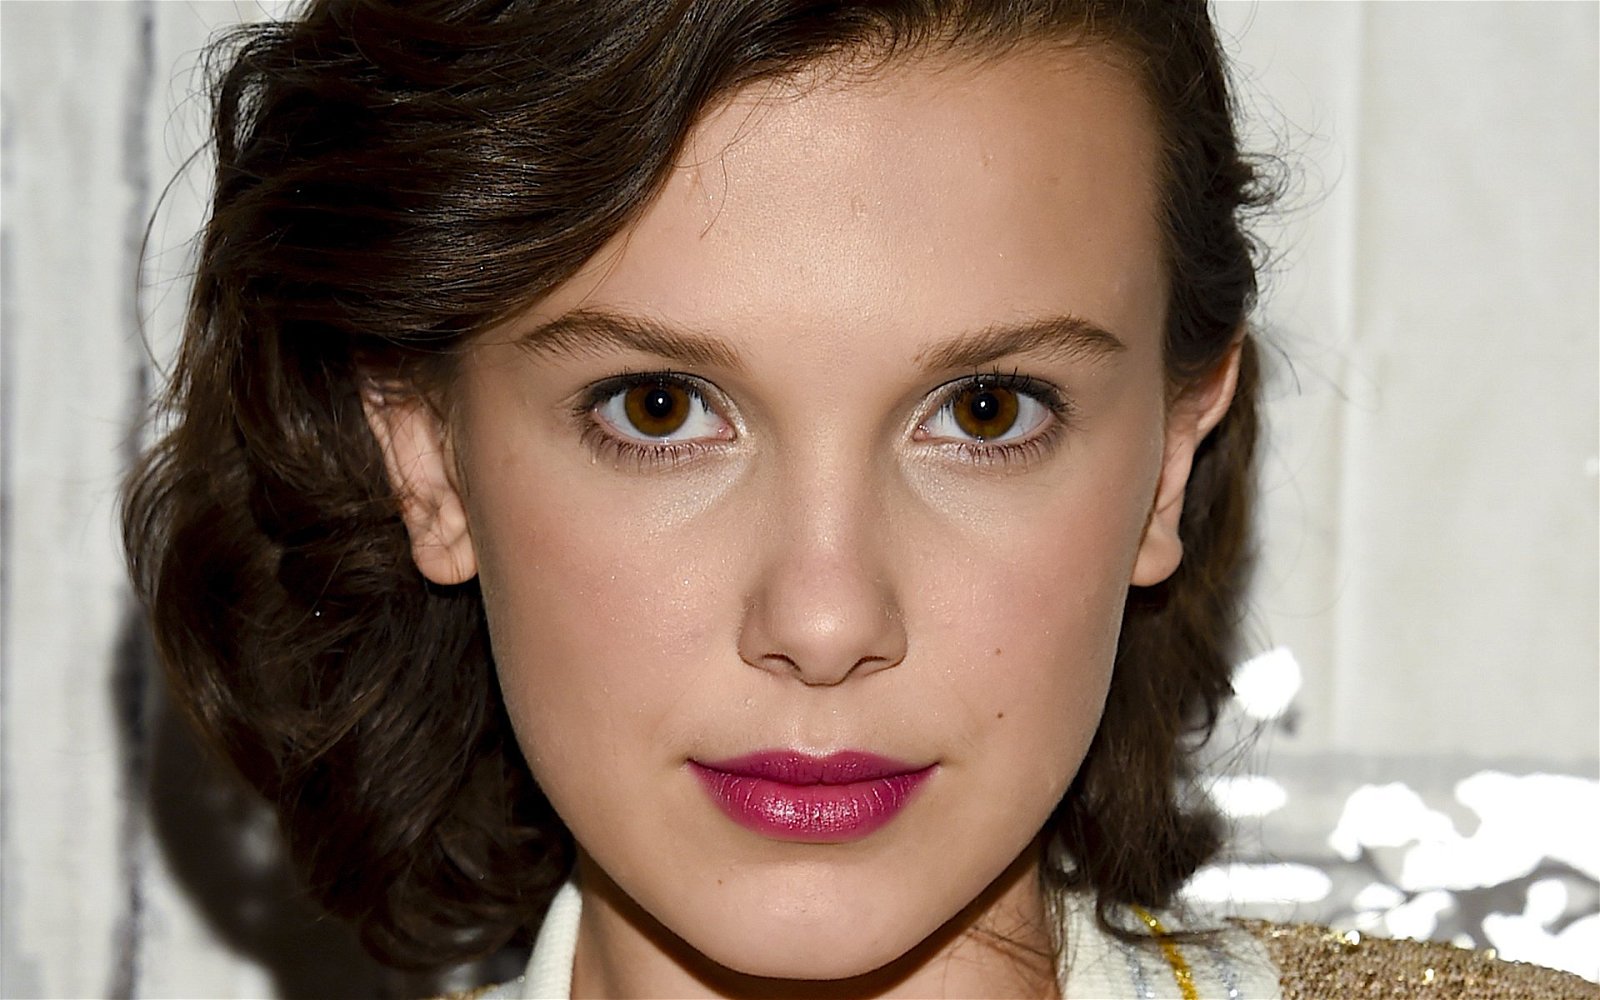 Millie Bobby Brown is the new ambassador for Louis Vuitton Eyewear